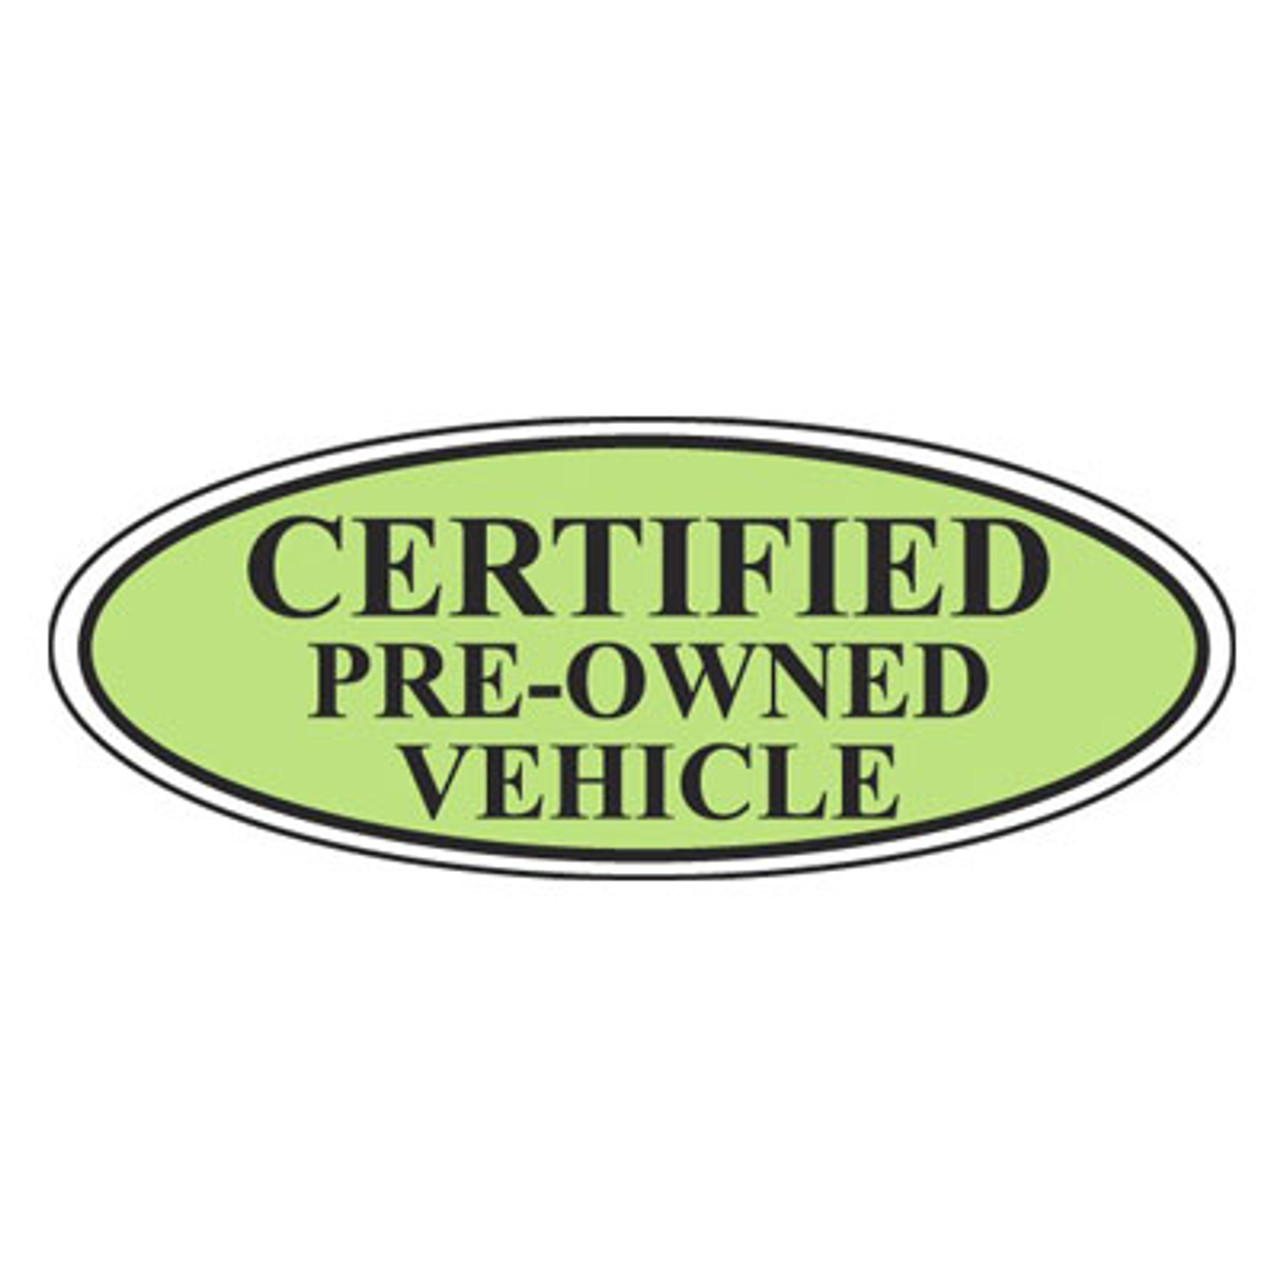 Certified Pre-Owned Vehicle Oval Sign 12pk {EZ196-E}